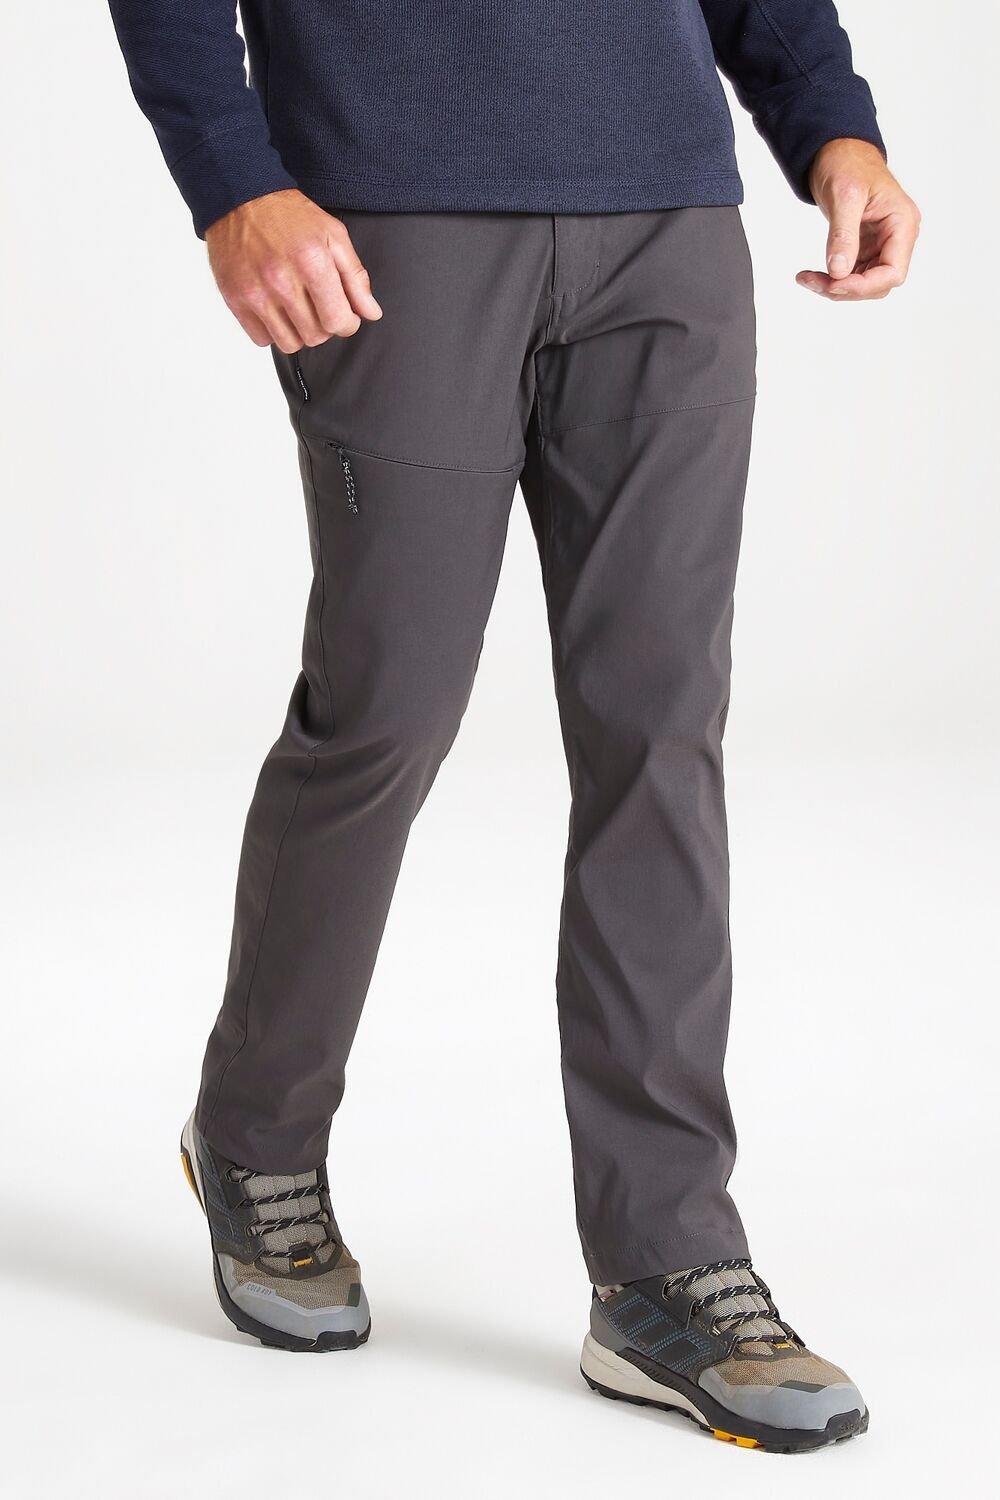 Forest Mens Water-Resistant Trekking Trousers | Mountain Warehouse GB